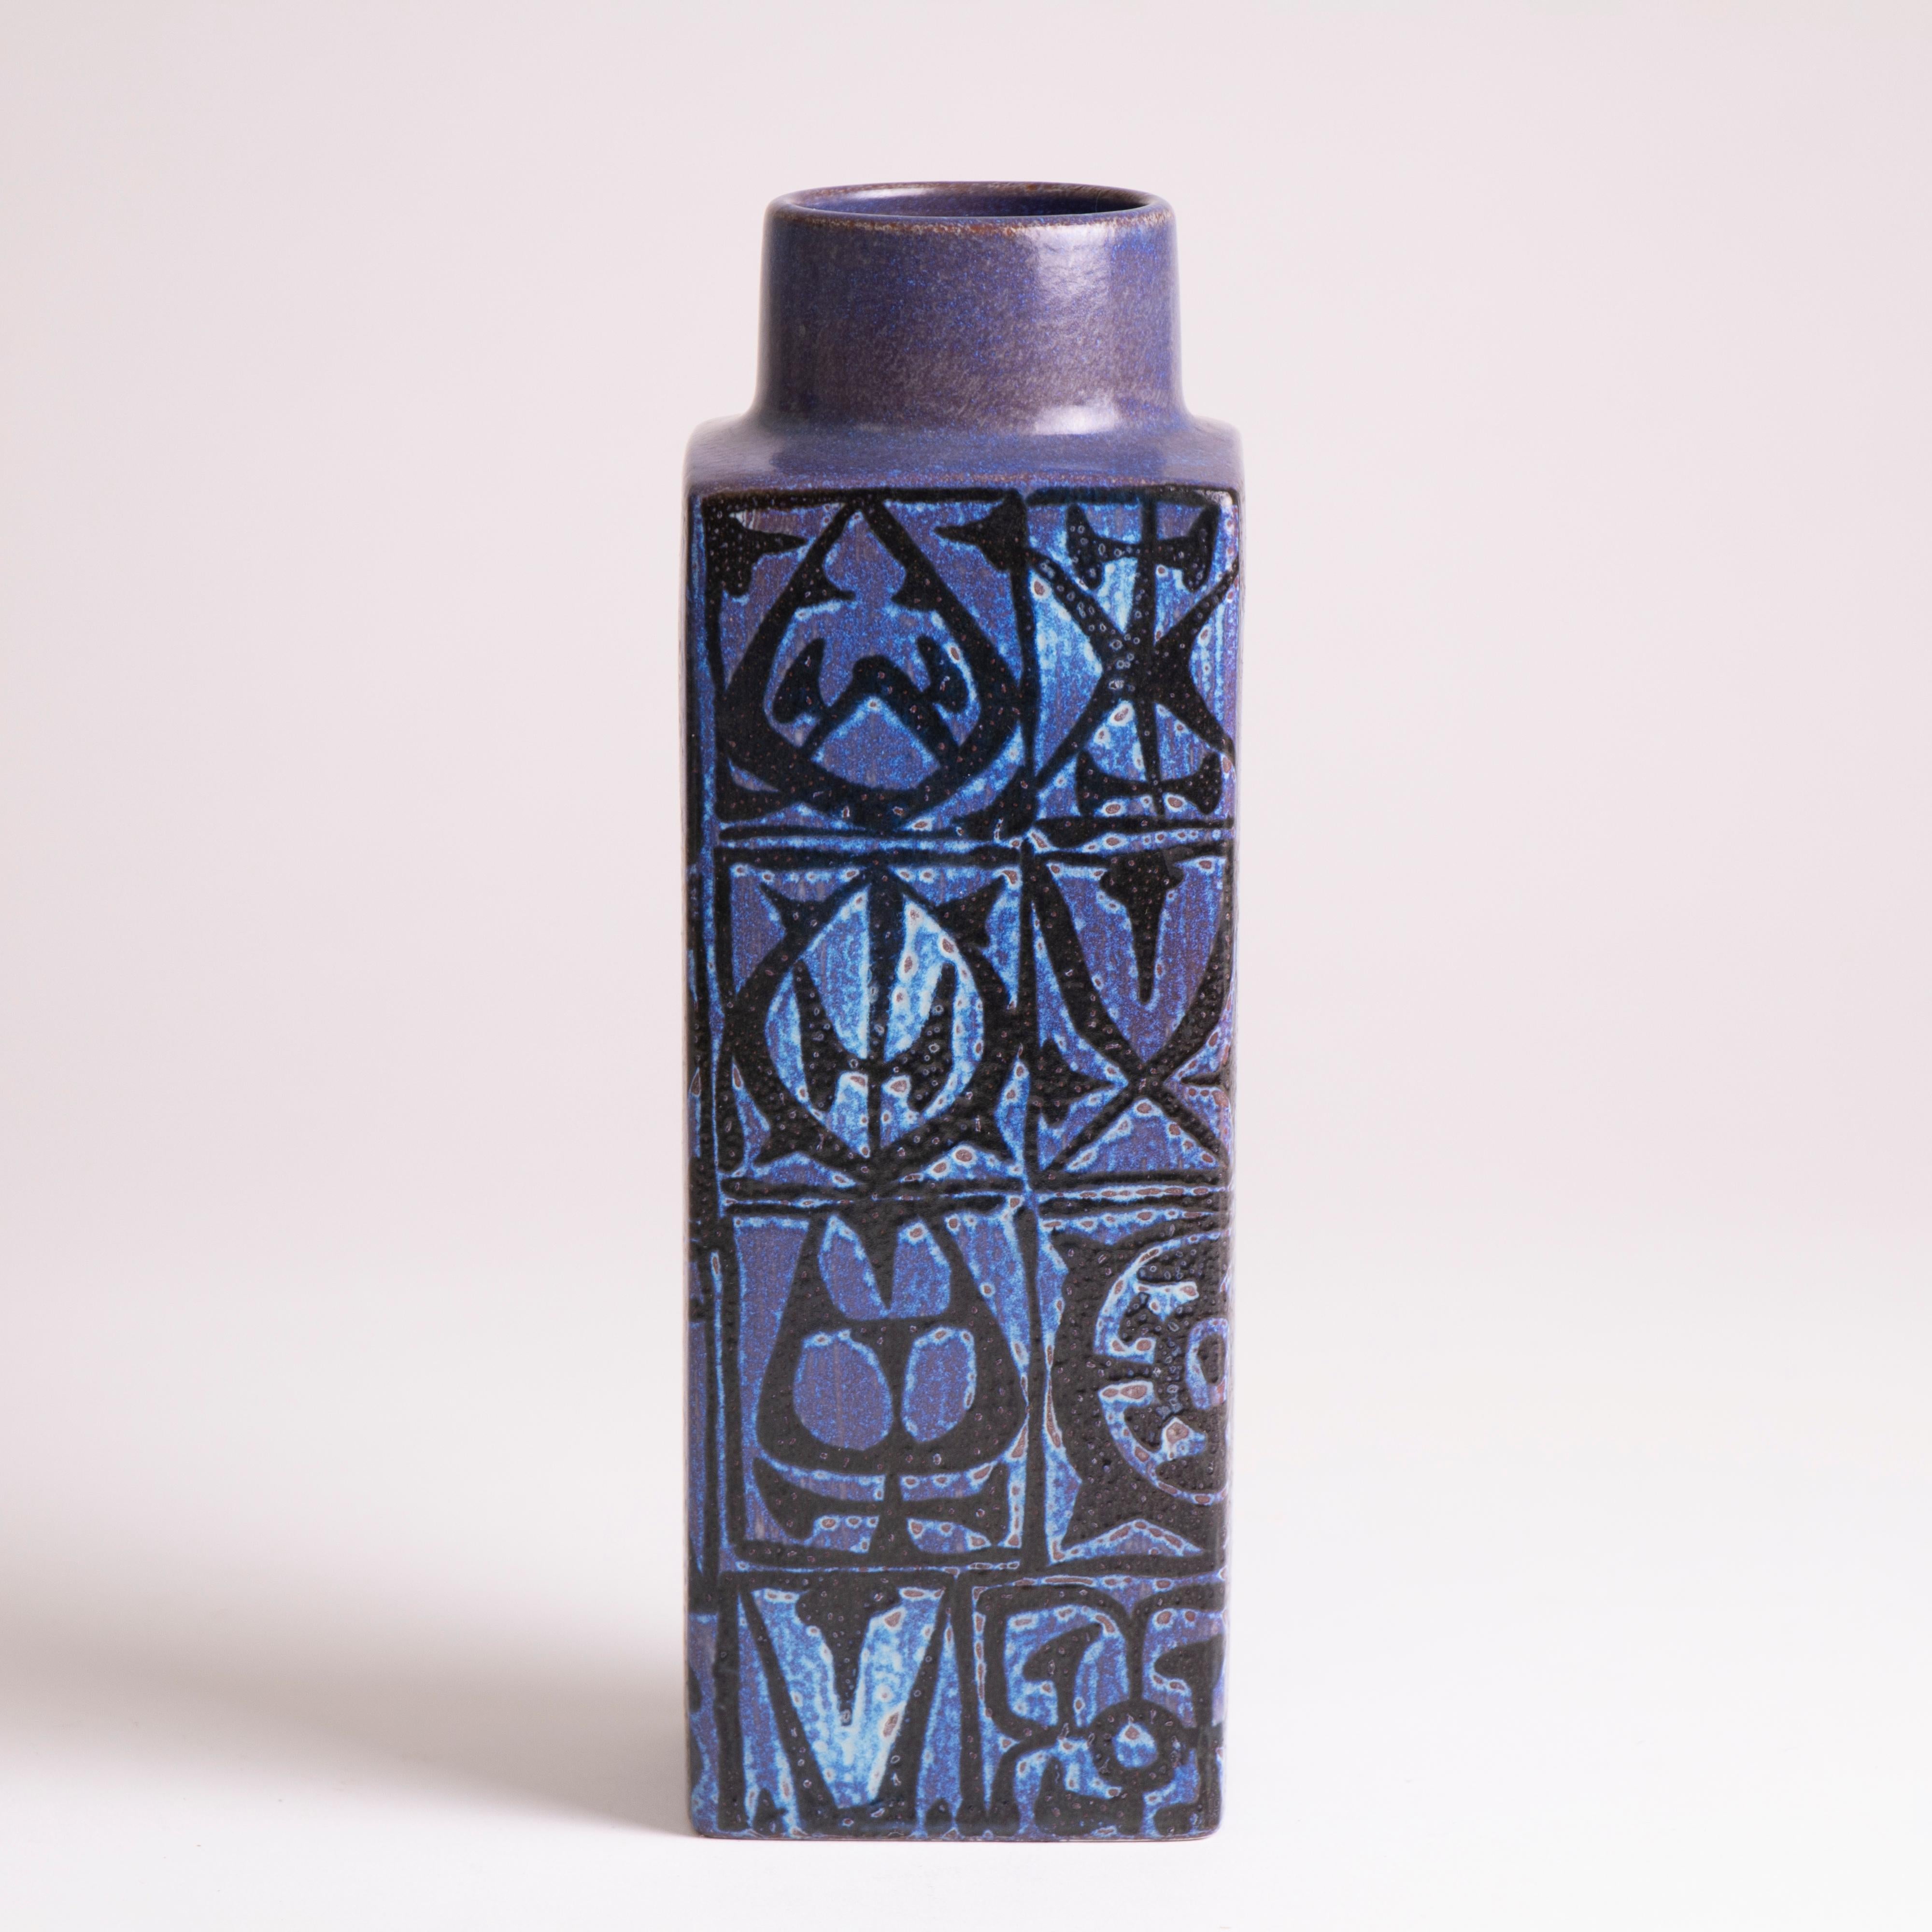 1970s Mid-century Royal Copenhagen vase designed by Nils Thorsson for their BACA series. Thorsson, who was the Artistic Director, designed this series with a highly detailed and complex relief pattern over the body of this vase. The different